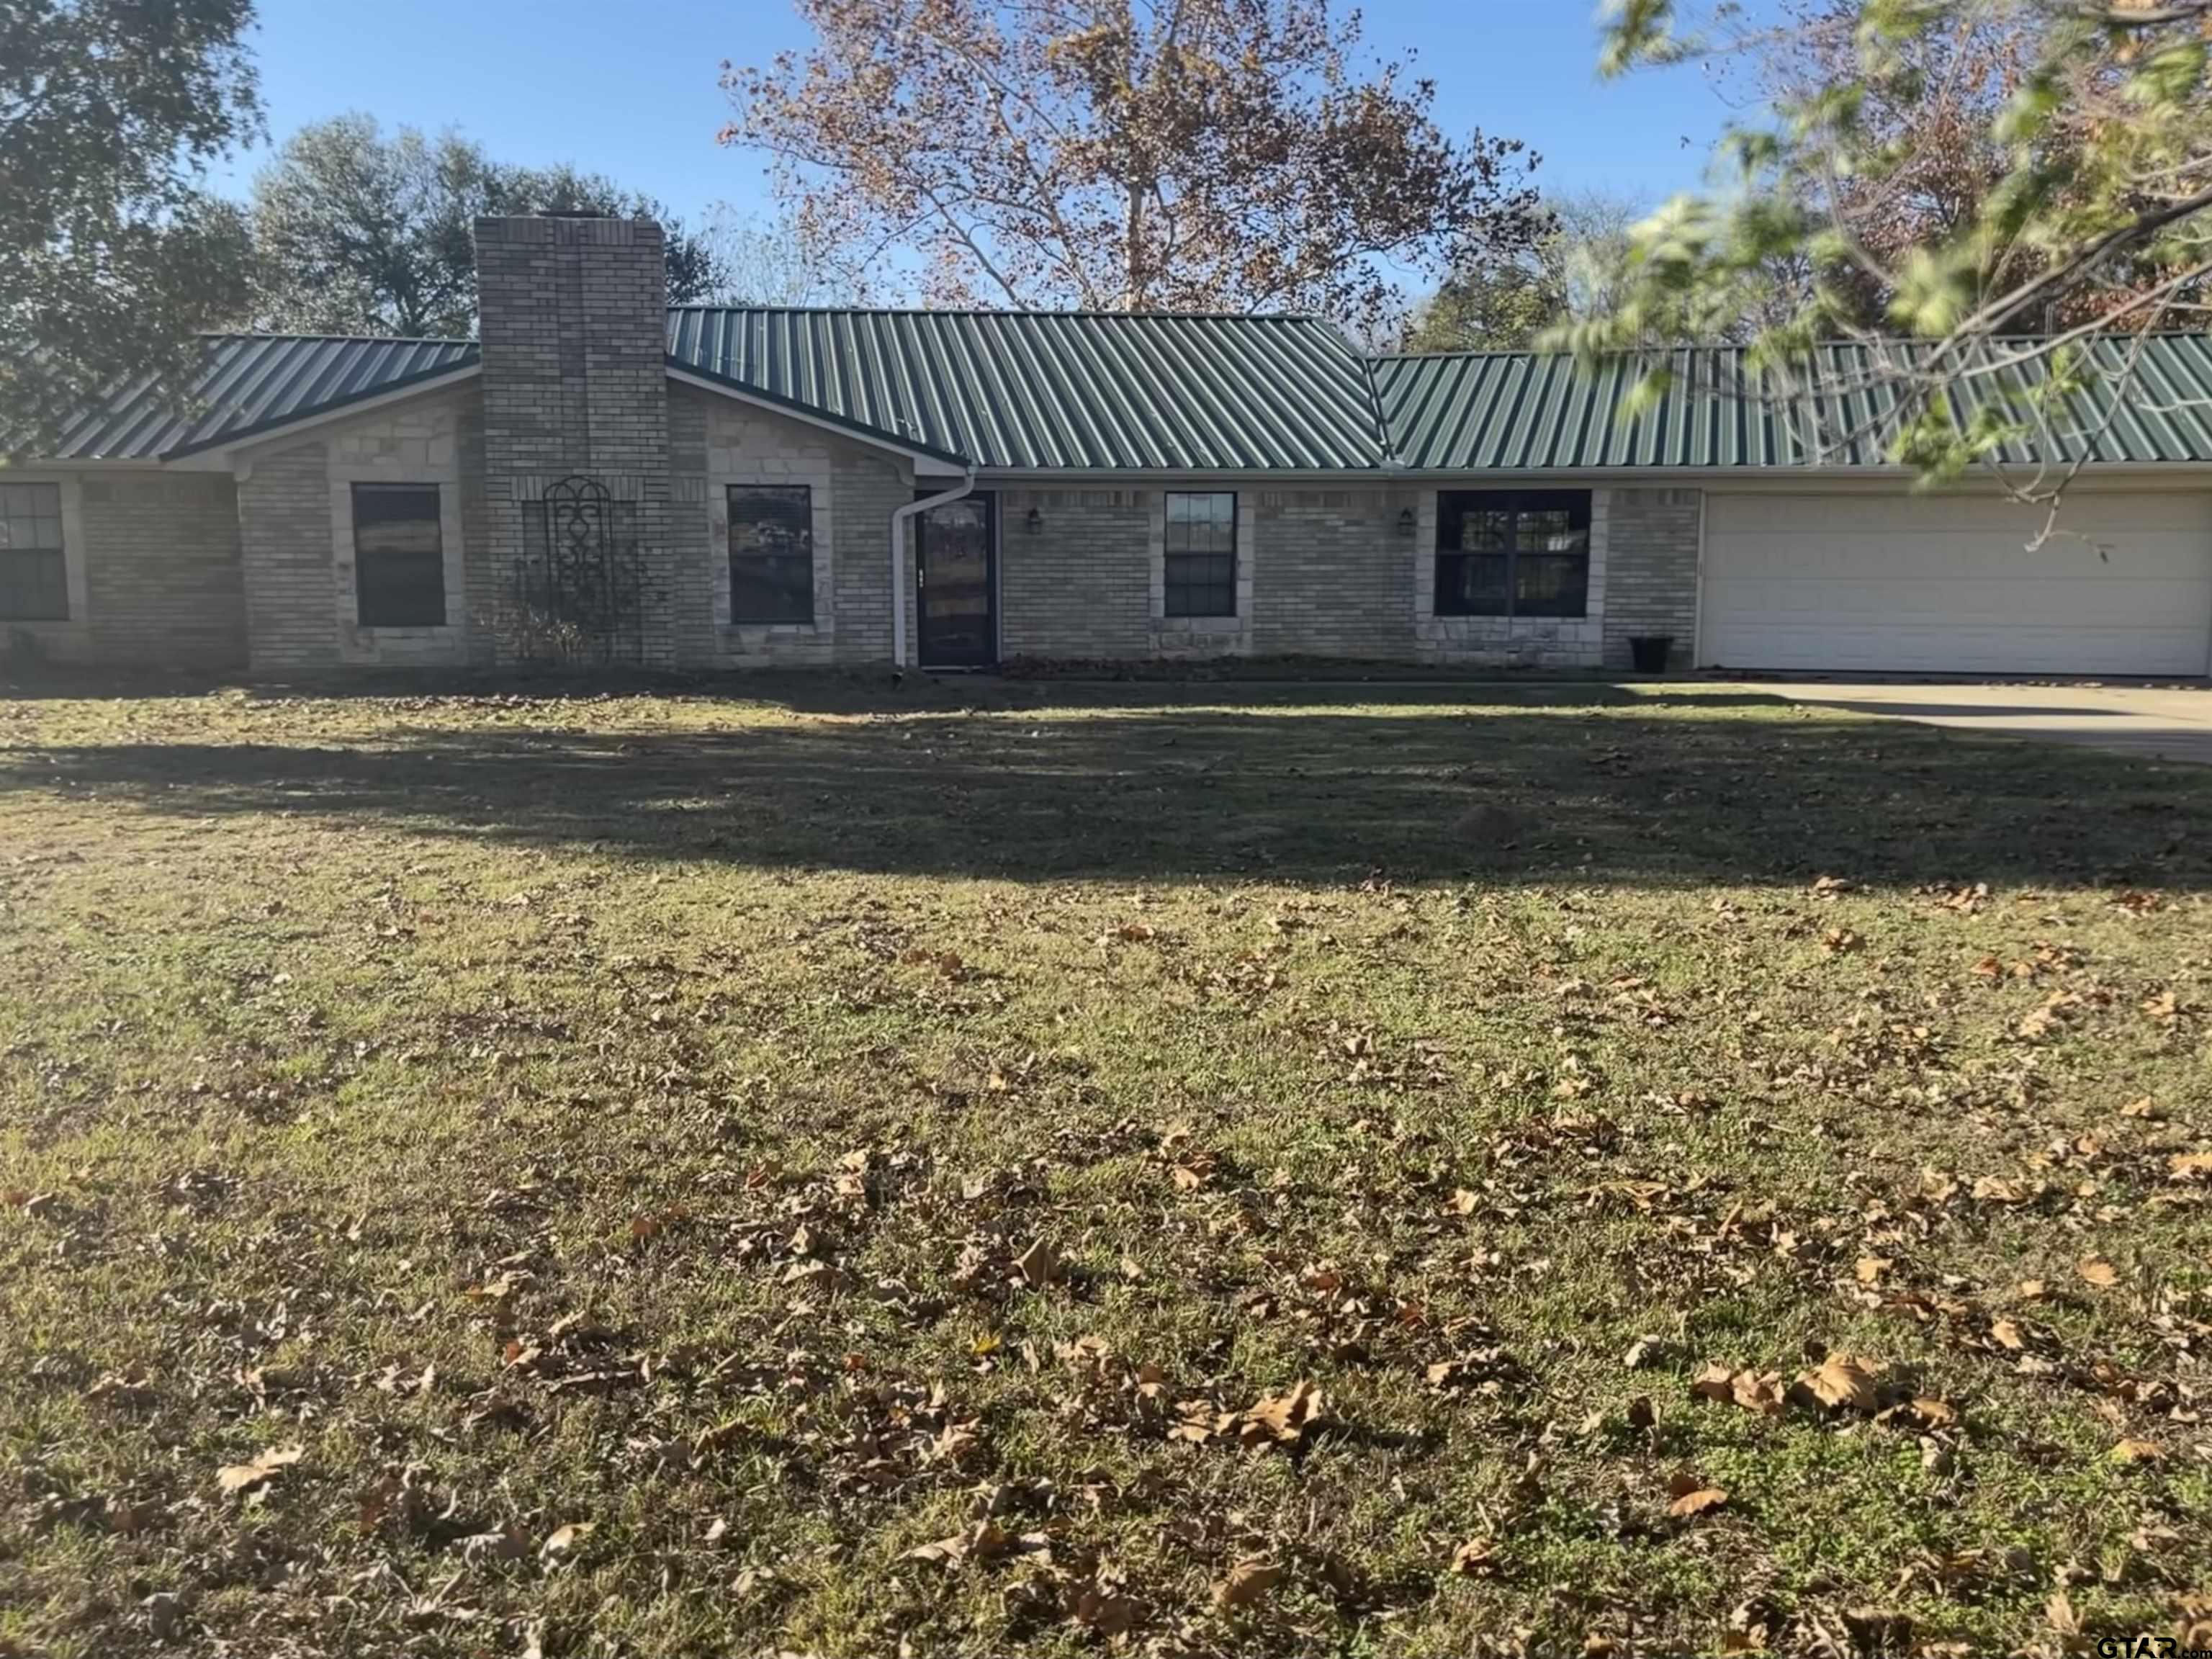 Beautiful 4 bedroom, 2 bath sitting over a little over 5 acres. All upgraded amenities - granite, wood and ceramic floors, to mention a few!! Spacious sunroom and 2 living areas. Massive covered deck all across the back for outdoor entertaining! *Shop not included* Dog friendly!